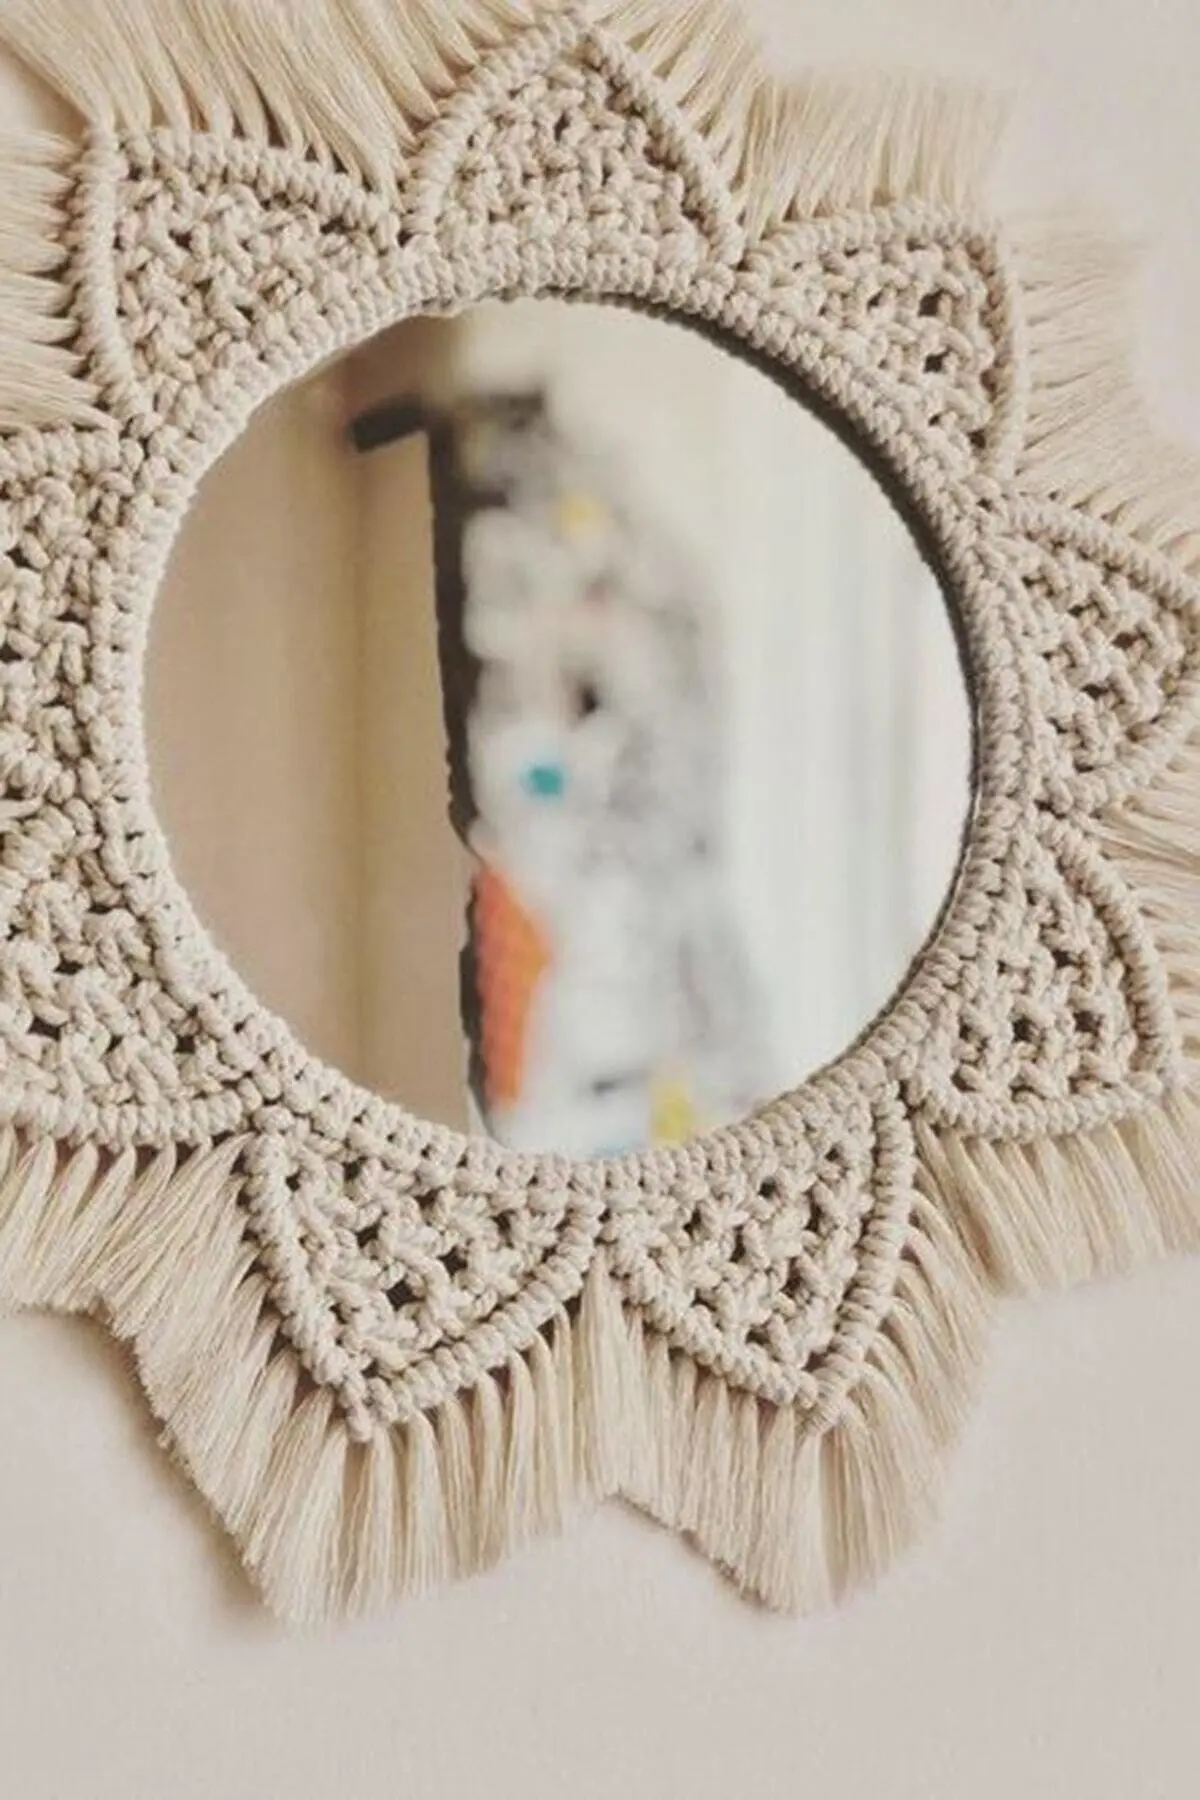 Beige Macrame Mirror Round decorative wall mirrors Boho home decor wall hanging living room decoration bedroom gift baby nursery